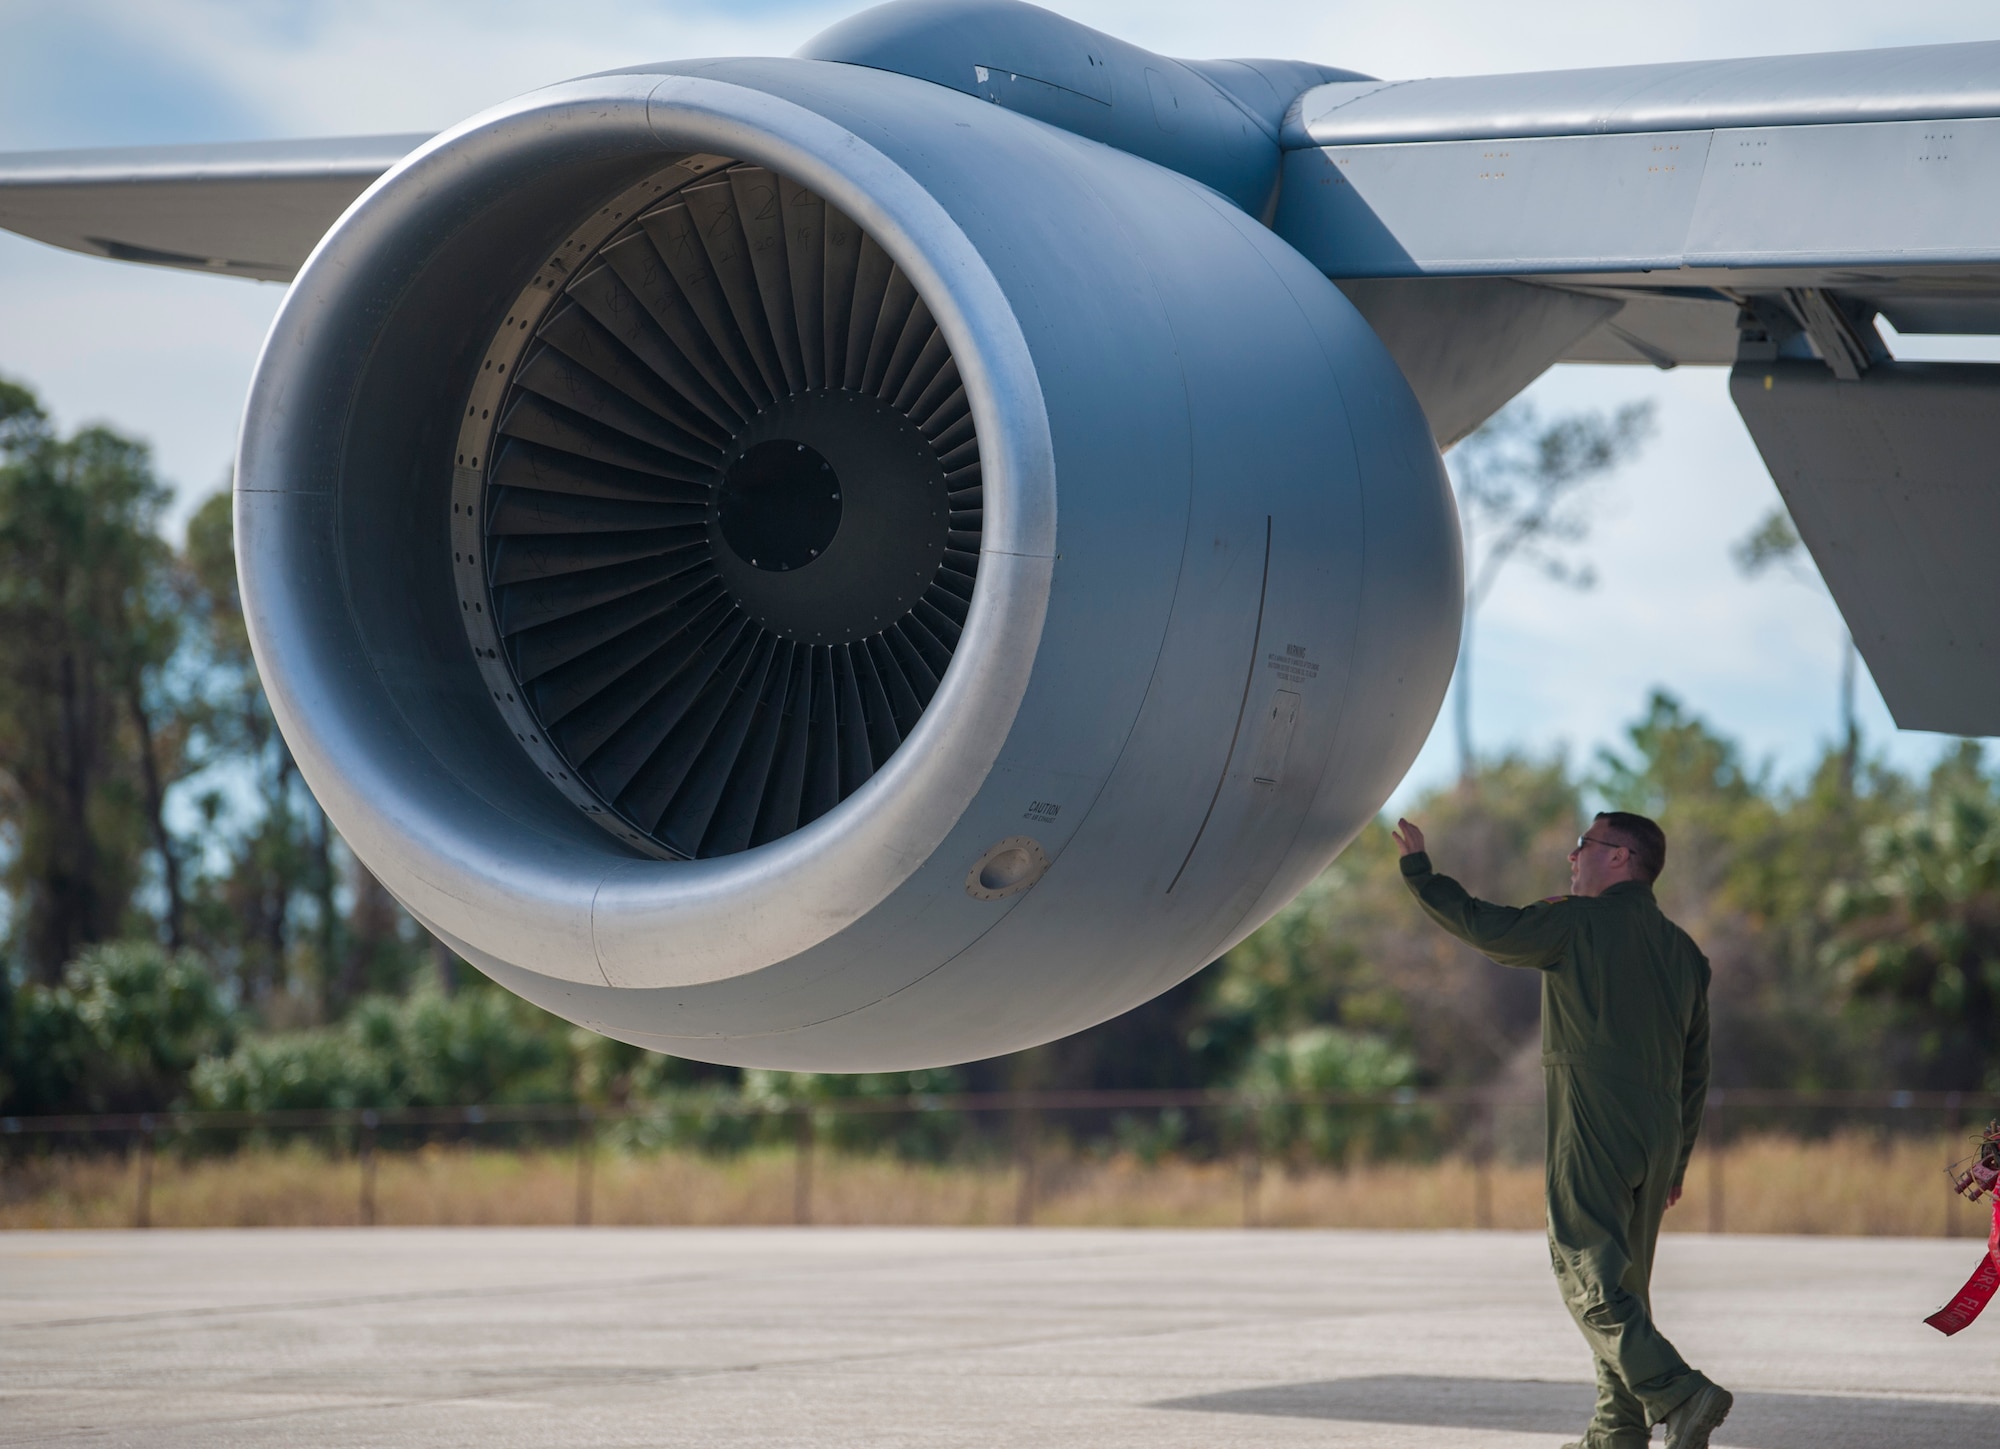 U.S. Air Force Maj. Justin Fadem, director of operations assigned to the 328th Airlift Squadron from Niagara Air Reserve Station (ARS), N.Y., conducts a pre-flight inspection of a KC-135 Stratotanker aircraft at MacDill Air Force Base, Fla., Jan. 30, 2018.